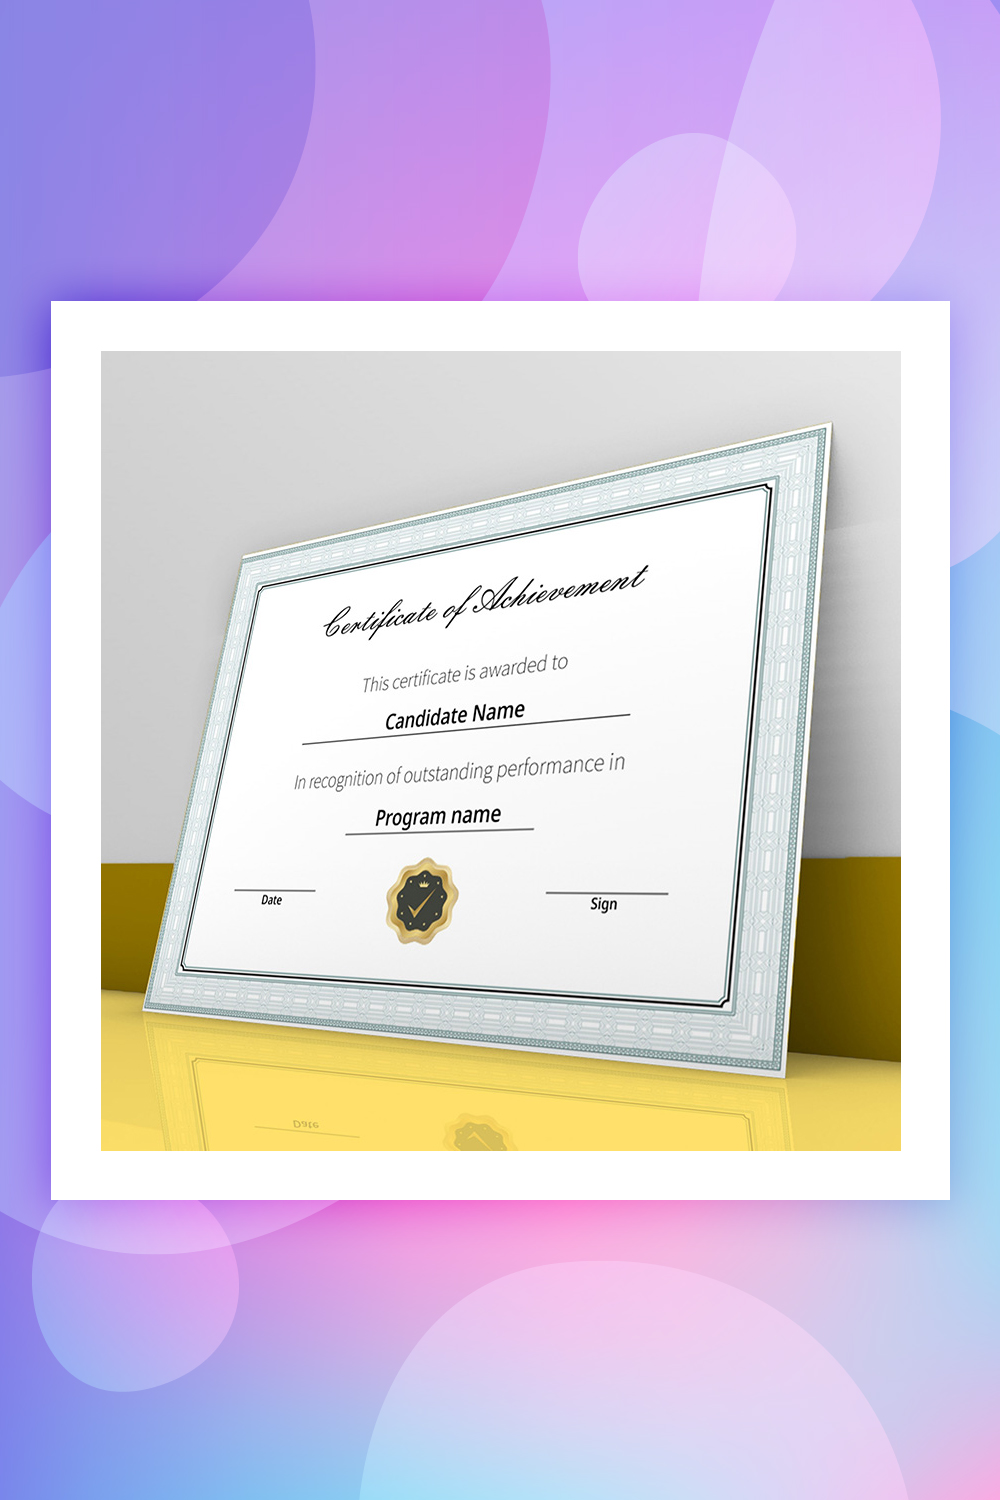 25 Attention-Grabbing Certificate Templates - Colorlib Regarding High Resolution Certificate Template